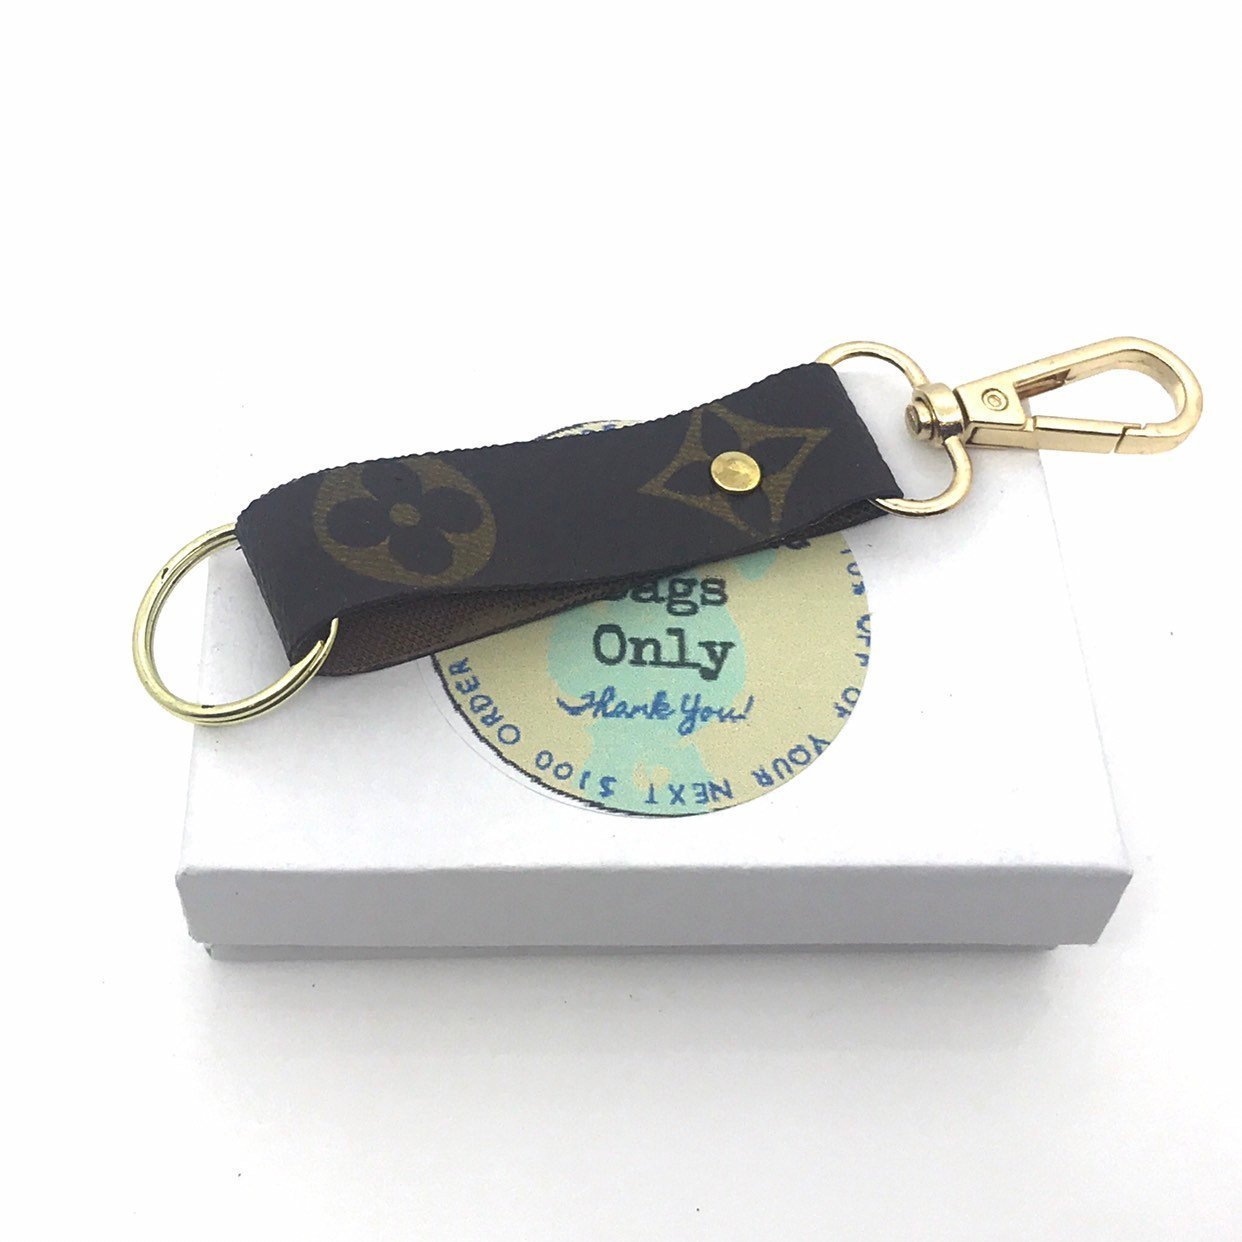 Clips for Bag/luggage Tags Louis Vuitton Luggage Tag Clips 